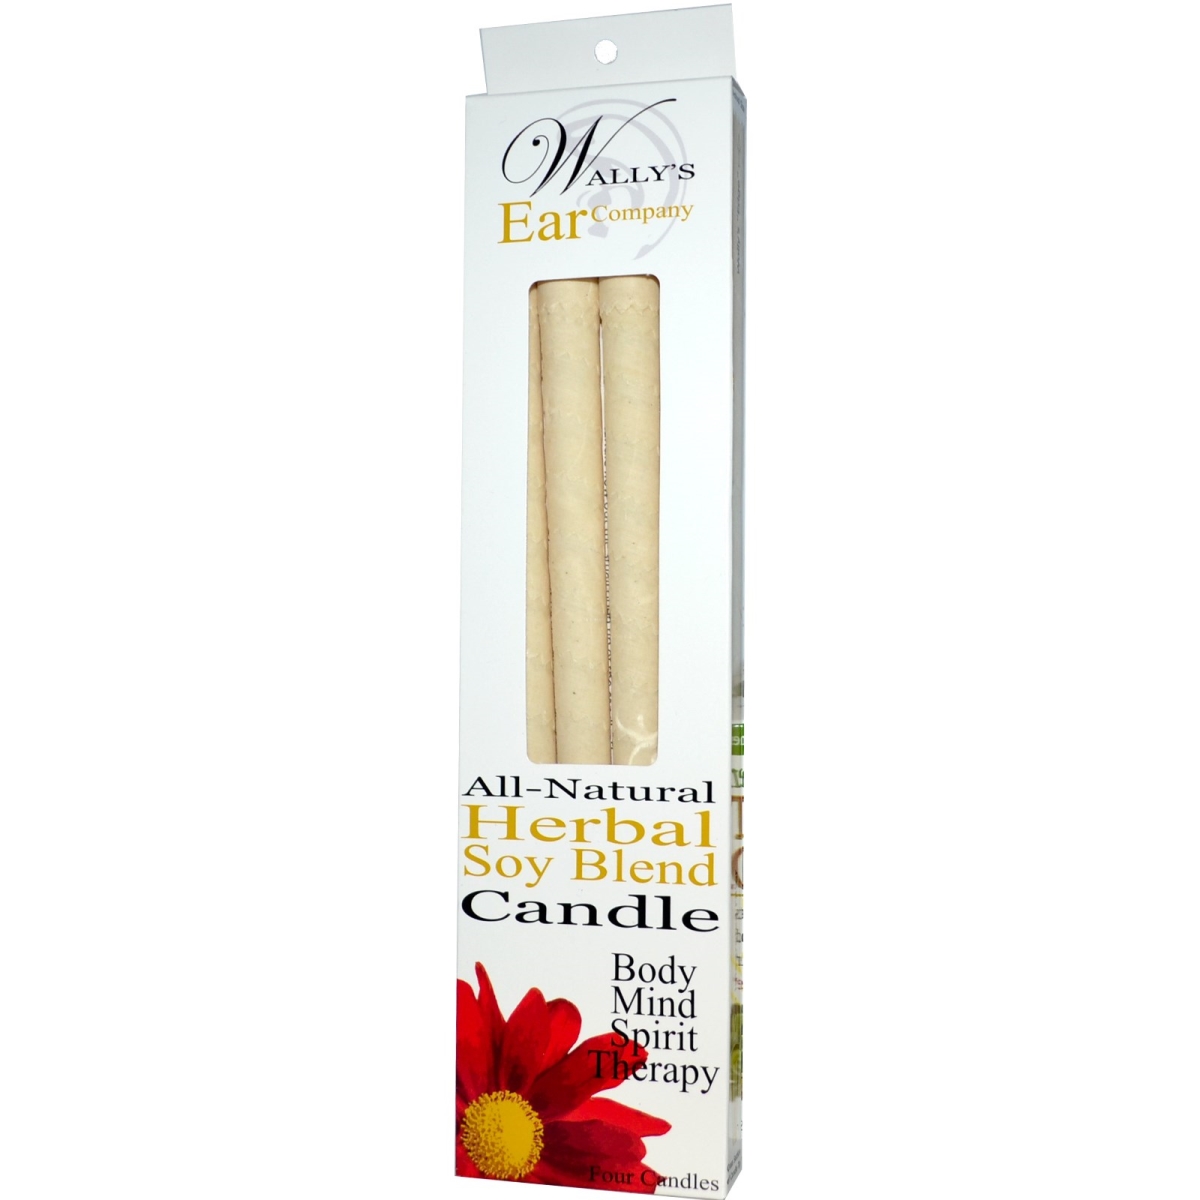 Khfm00903245 Herbal Soy Blend Ear Candle, 4 Count